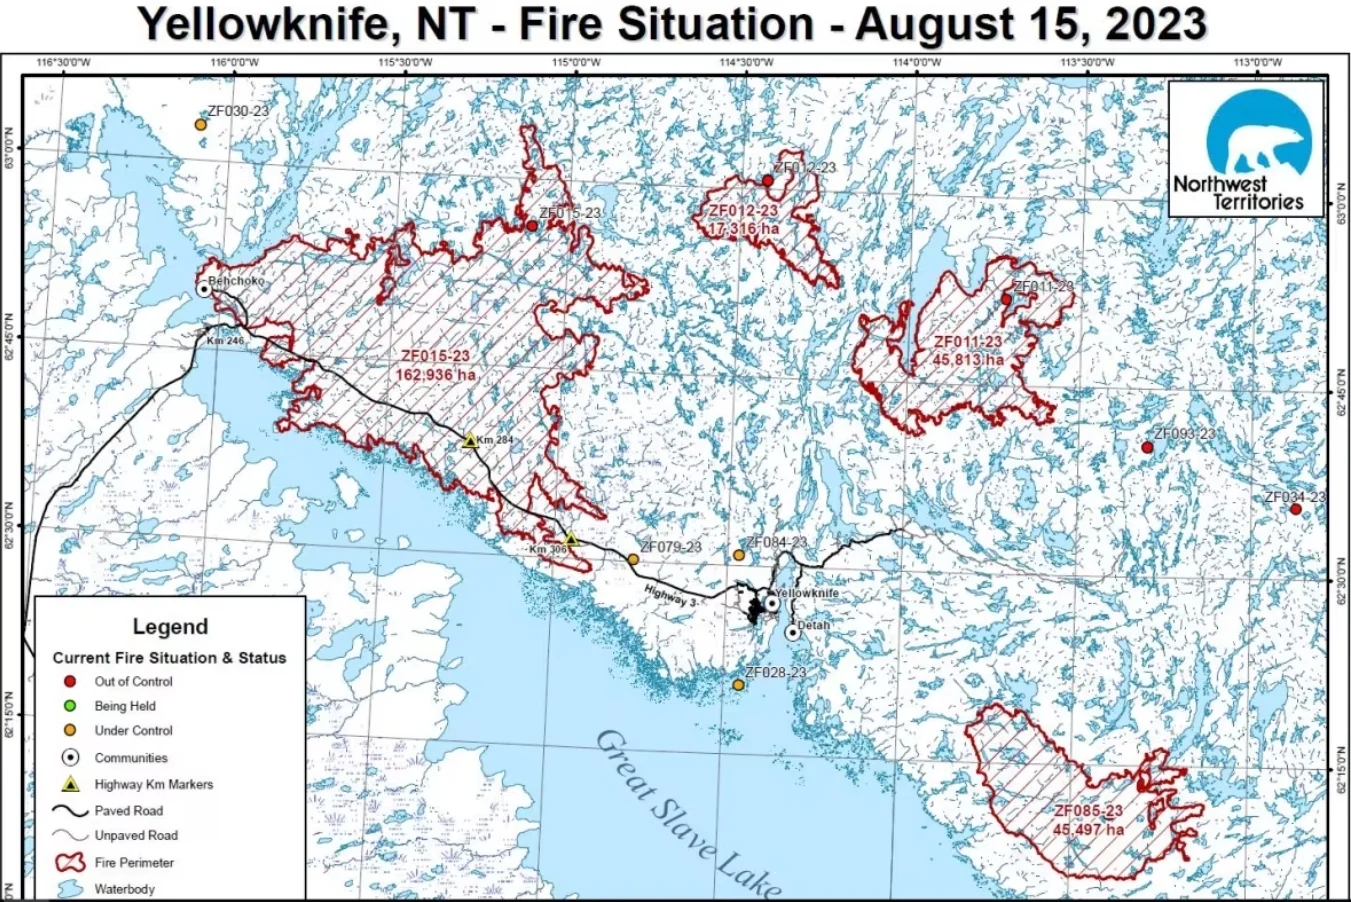 CBC - Yellowknife fire situation - Aug15